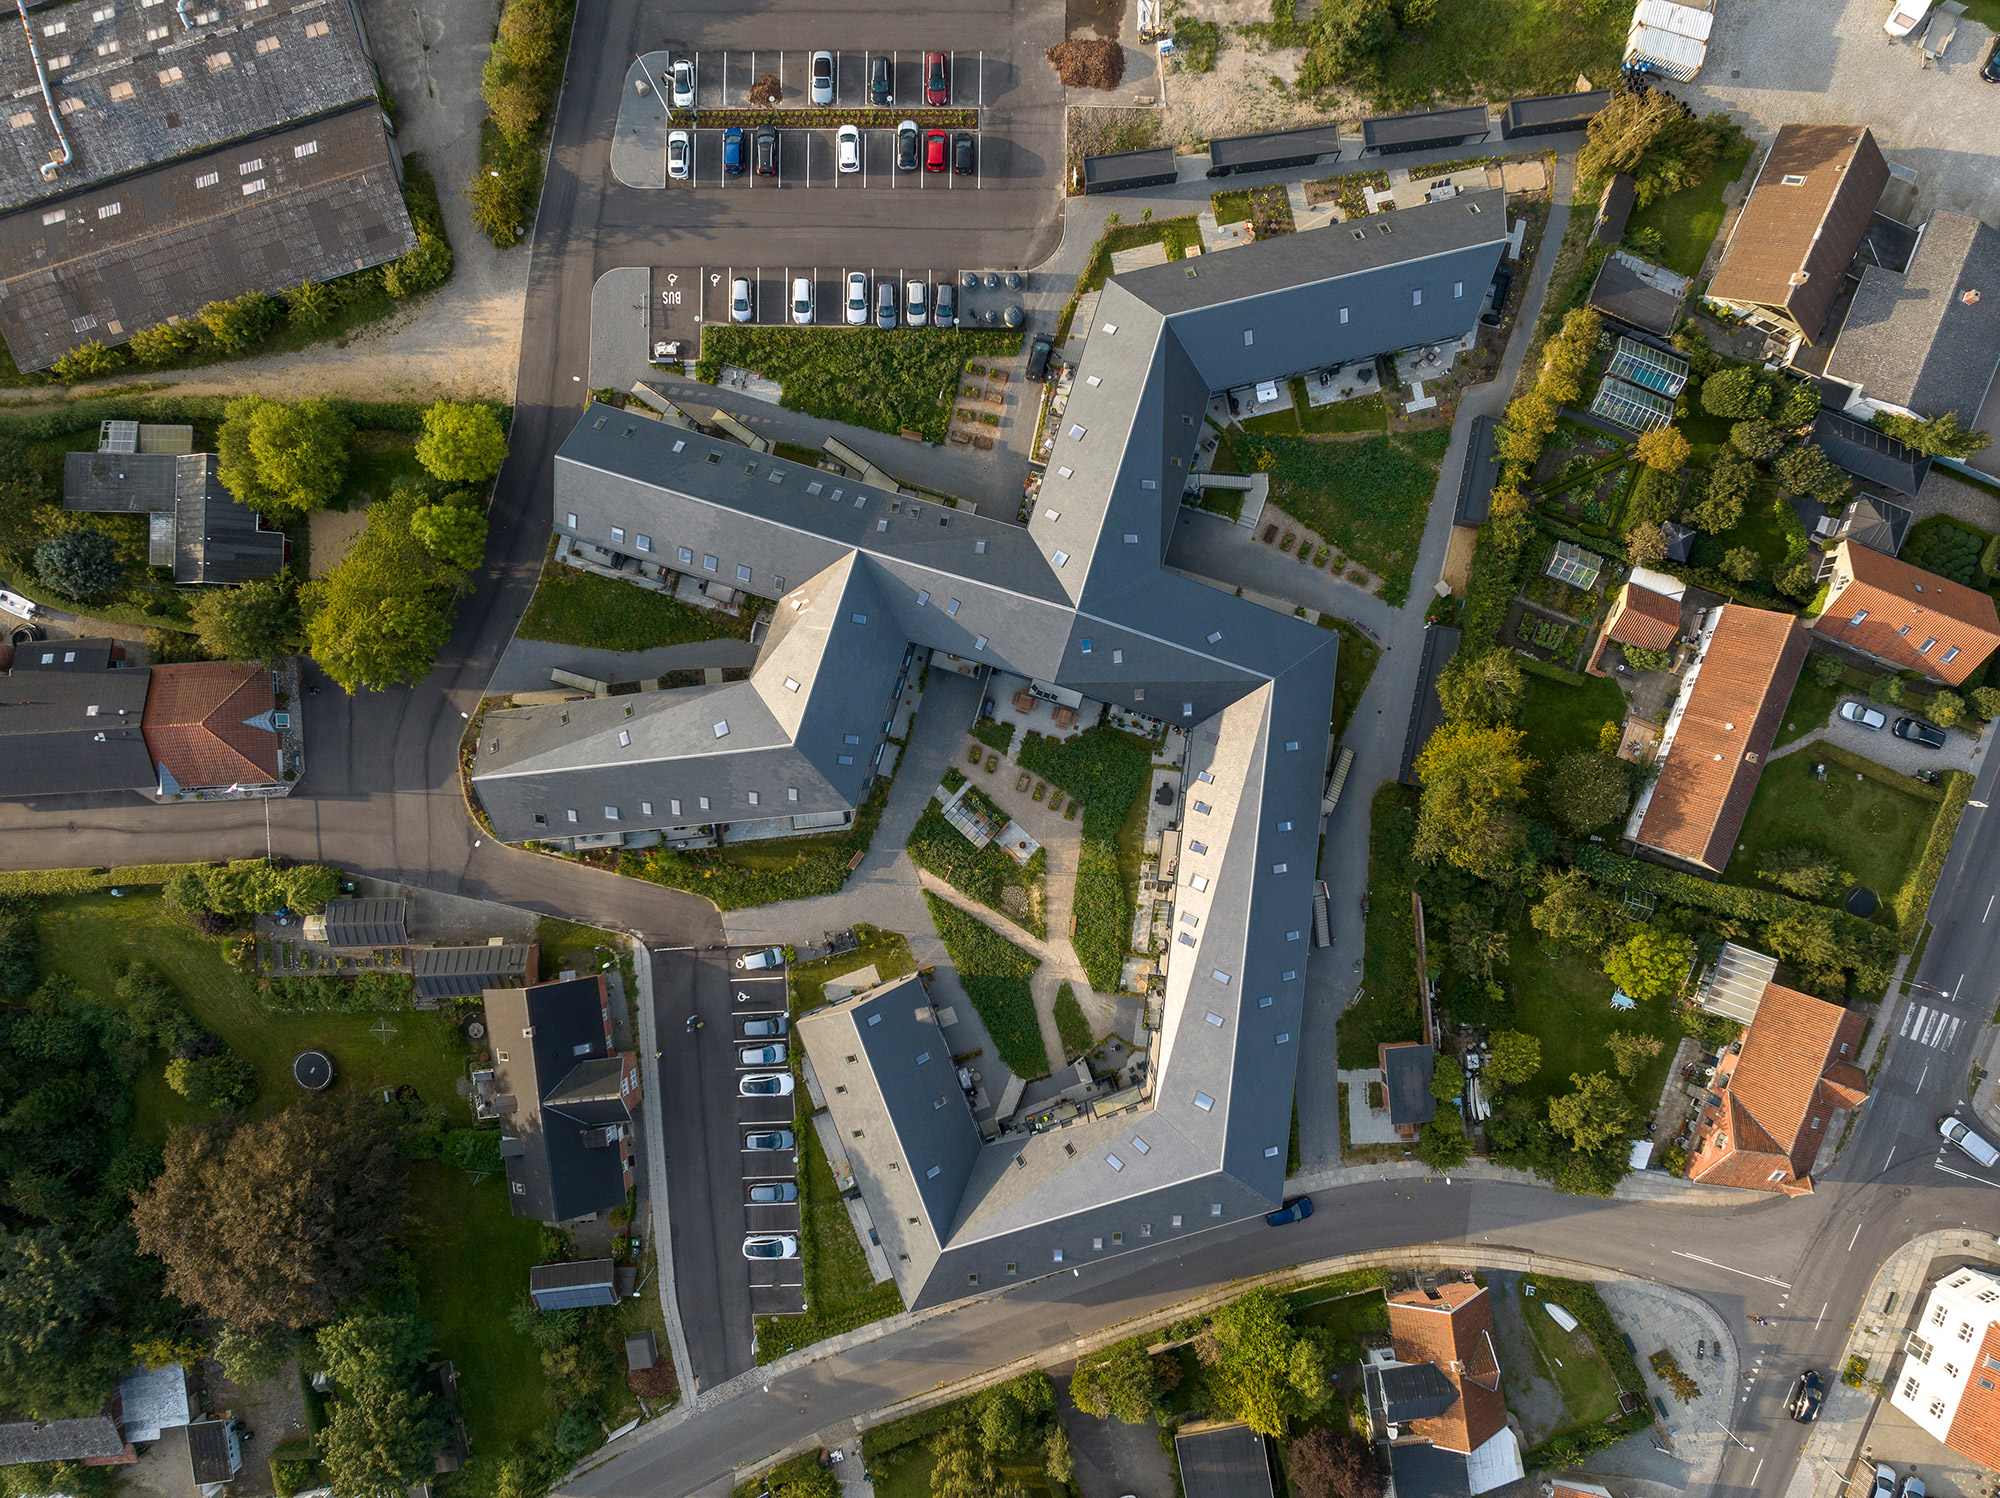 Innovative Housing in Malling: CEBRA Architects’ Homage to Local Heritage